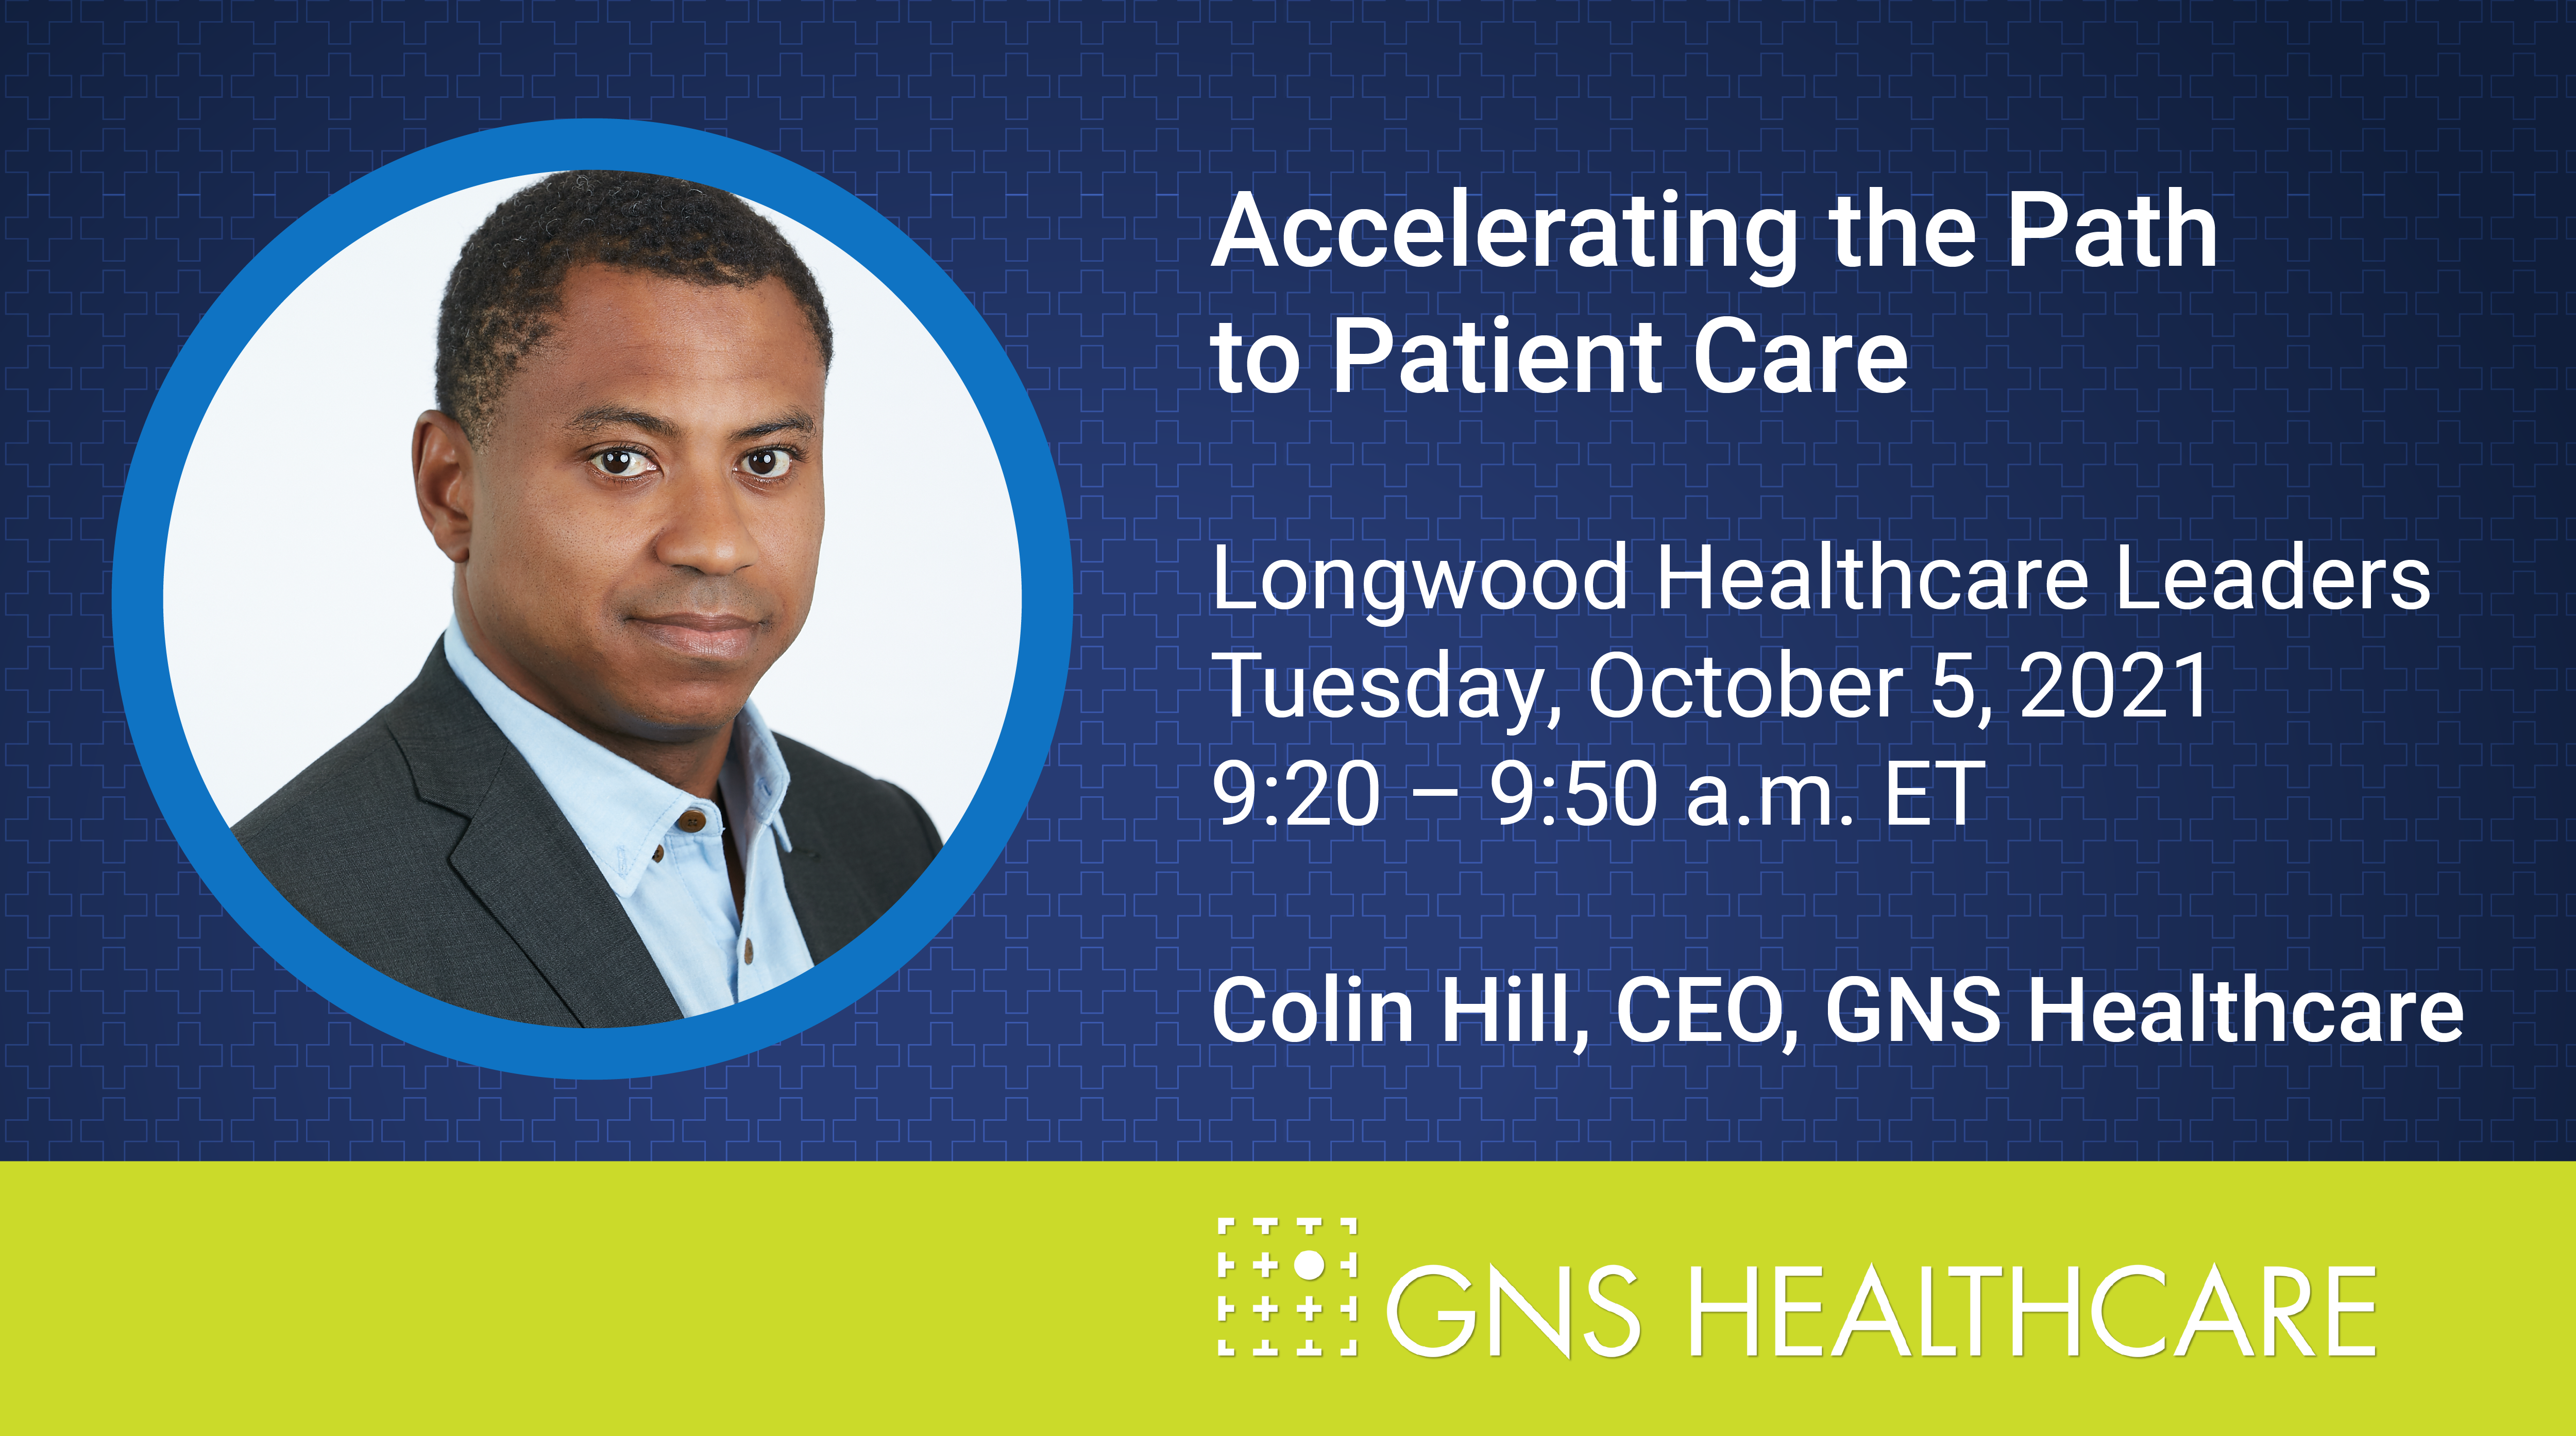 Colin Hill to Speak at The Longwood Healthcare Leaders Conference